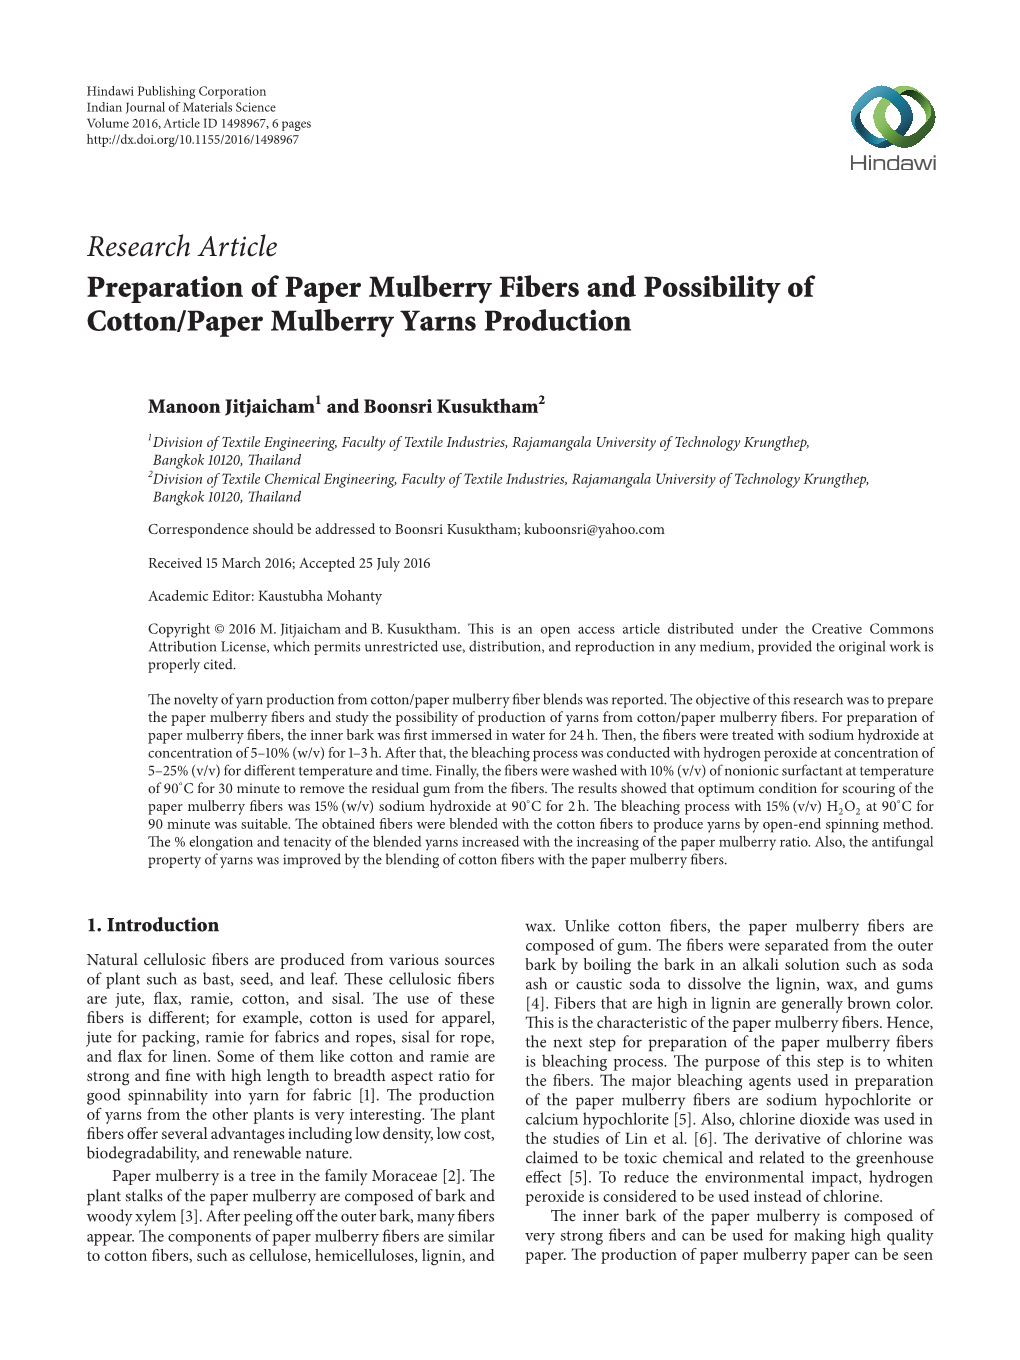 Research Article Preparation of Paper Mulberry Fibers and Possibility of Cotton/Paper Mulberry Yarns Production